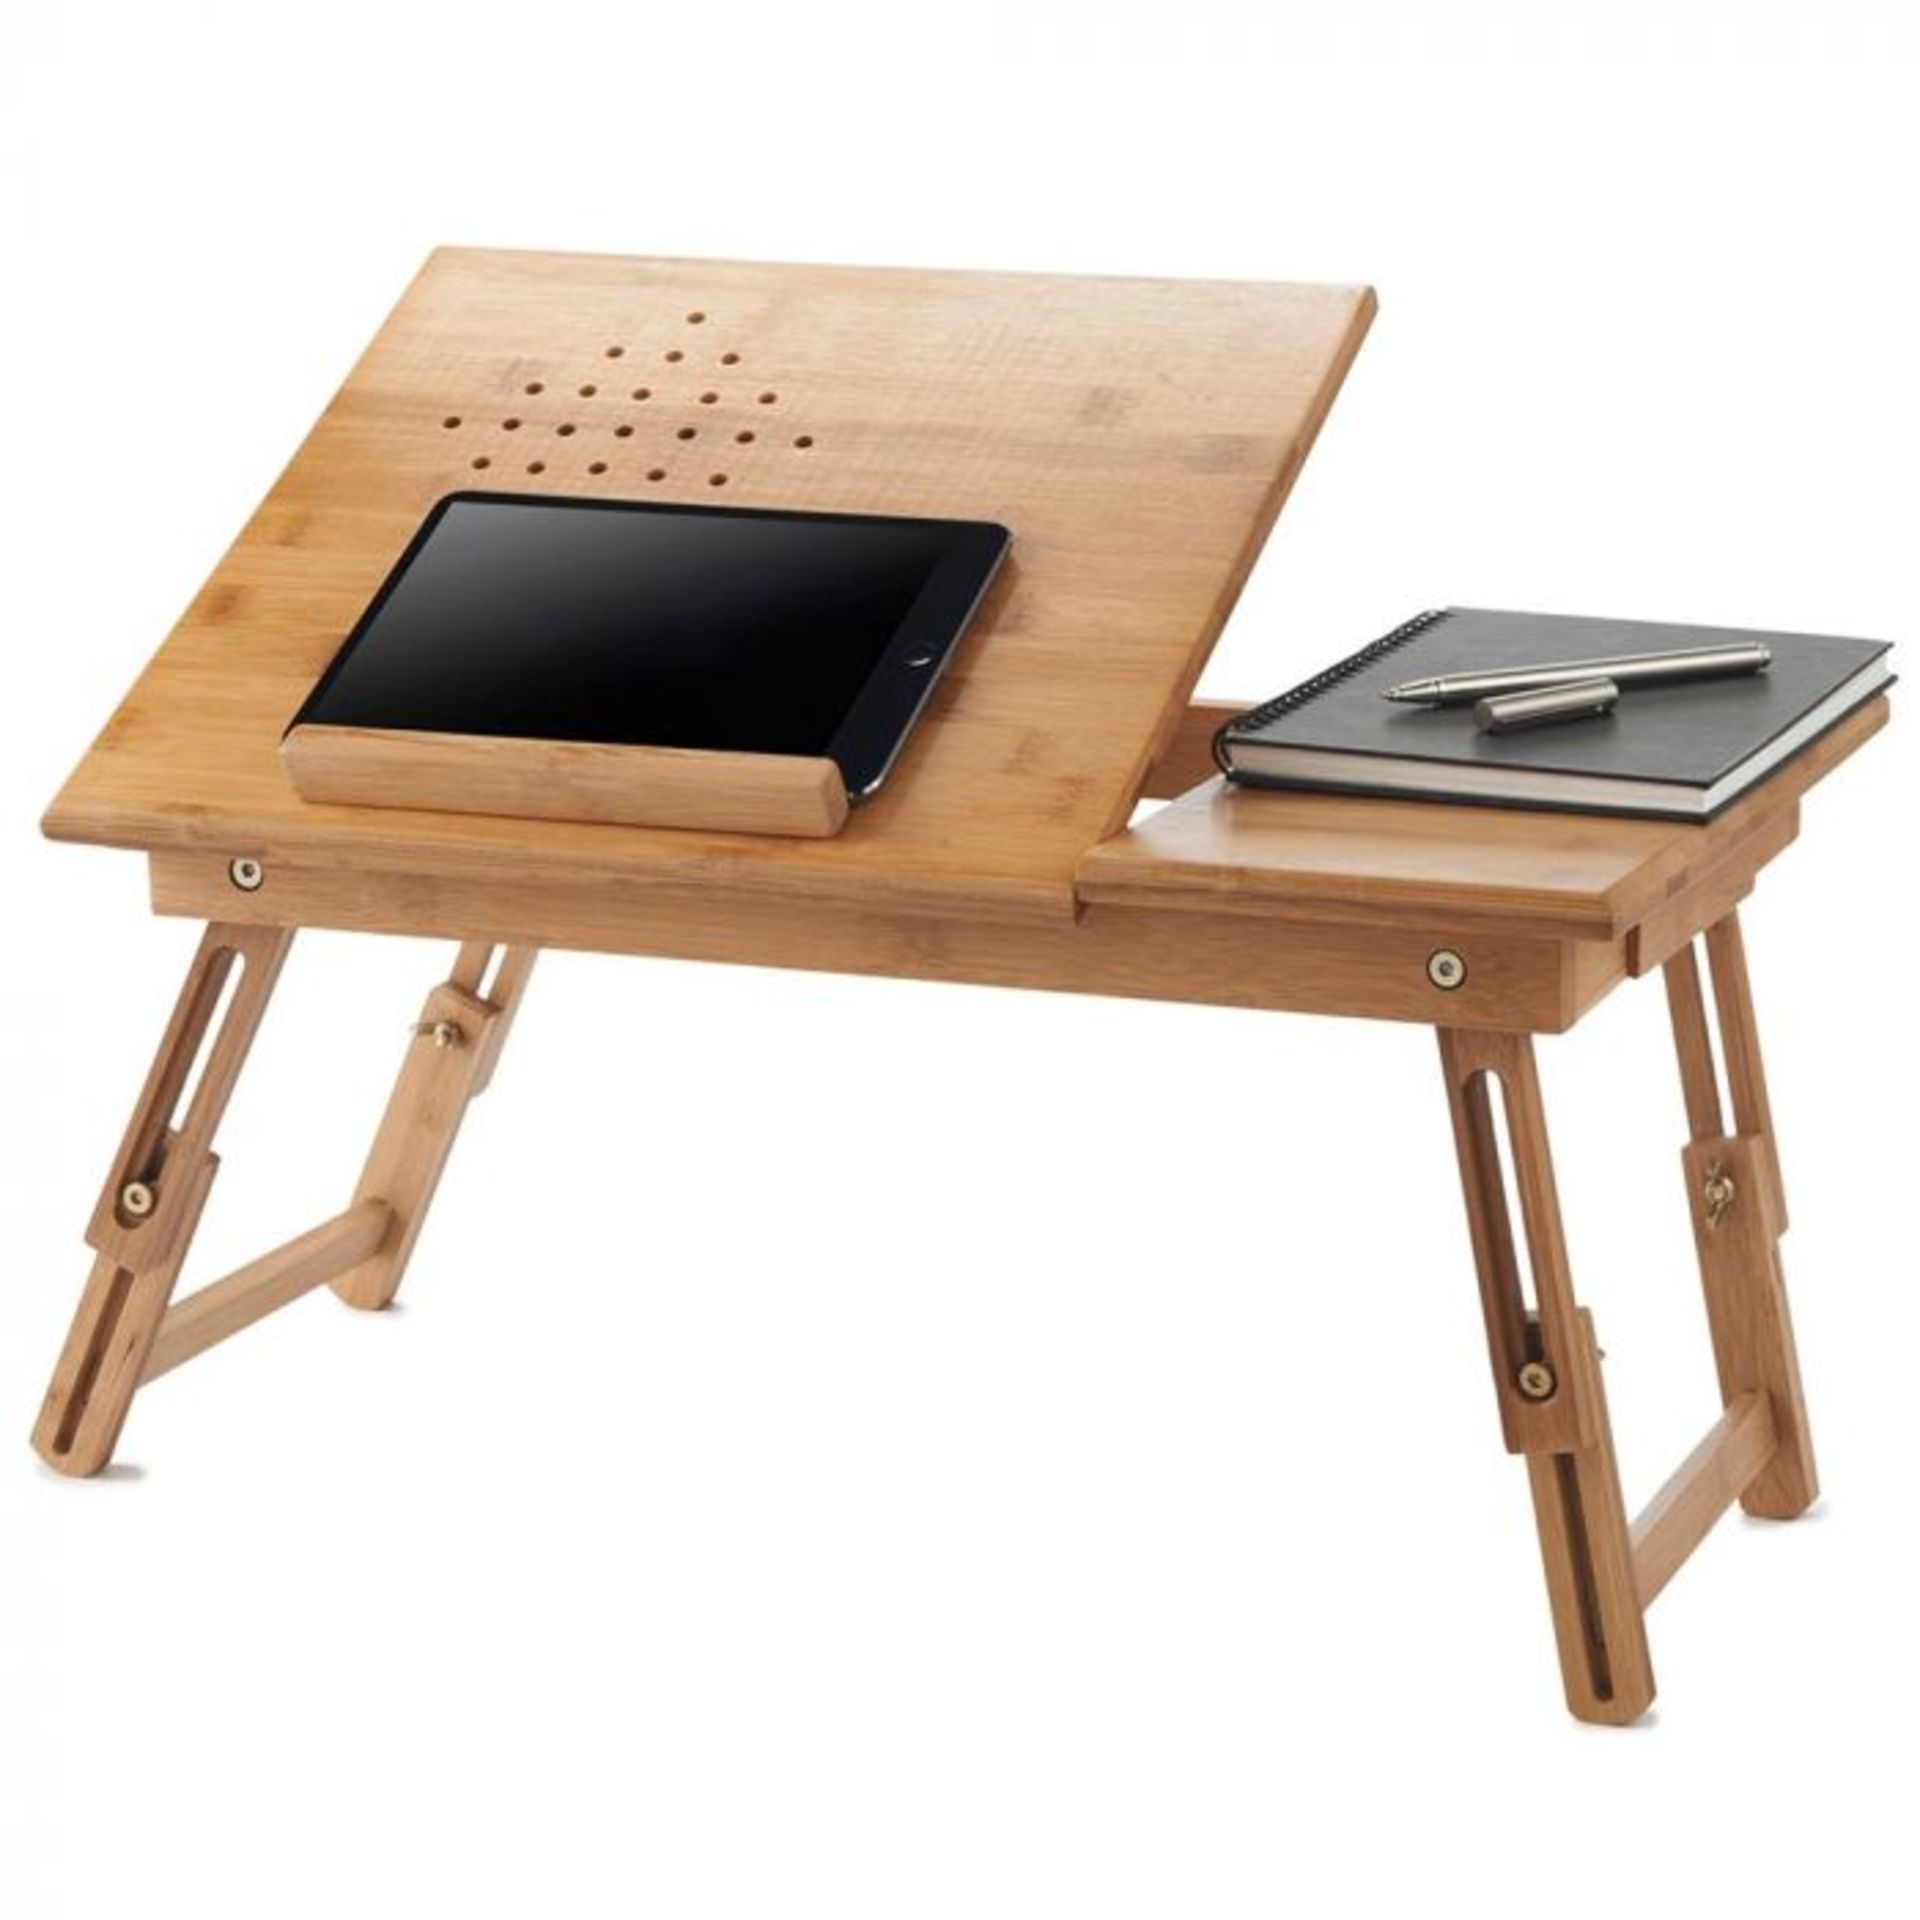 (S314) Bamboo Tablet & Laptop Table Suits most standard-sized laptops Sturdy but lightweight ... - Image 8 of 8